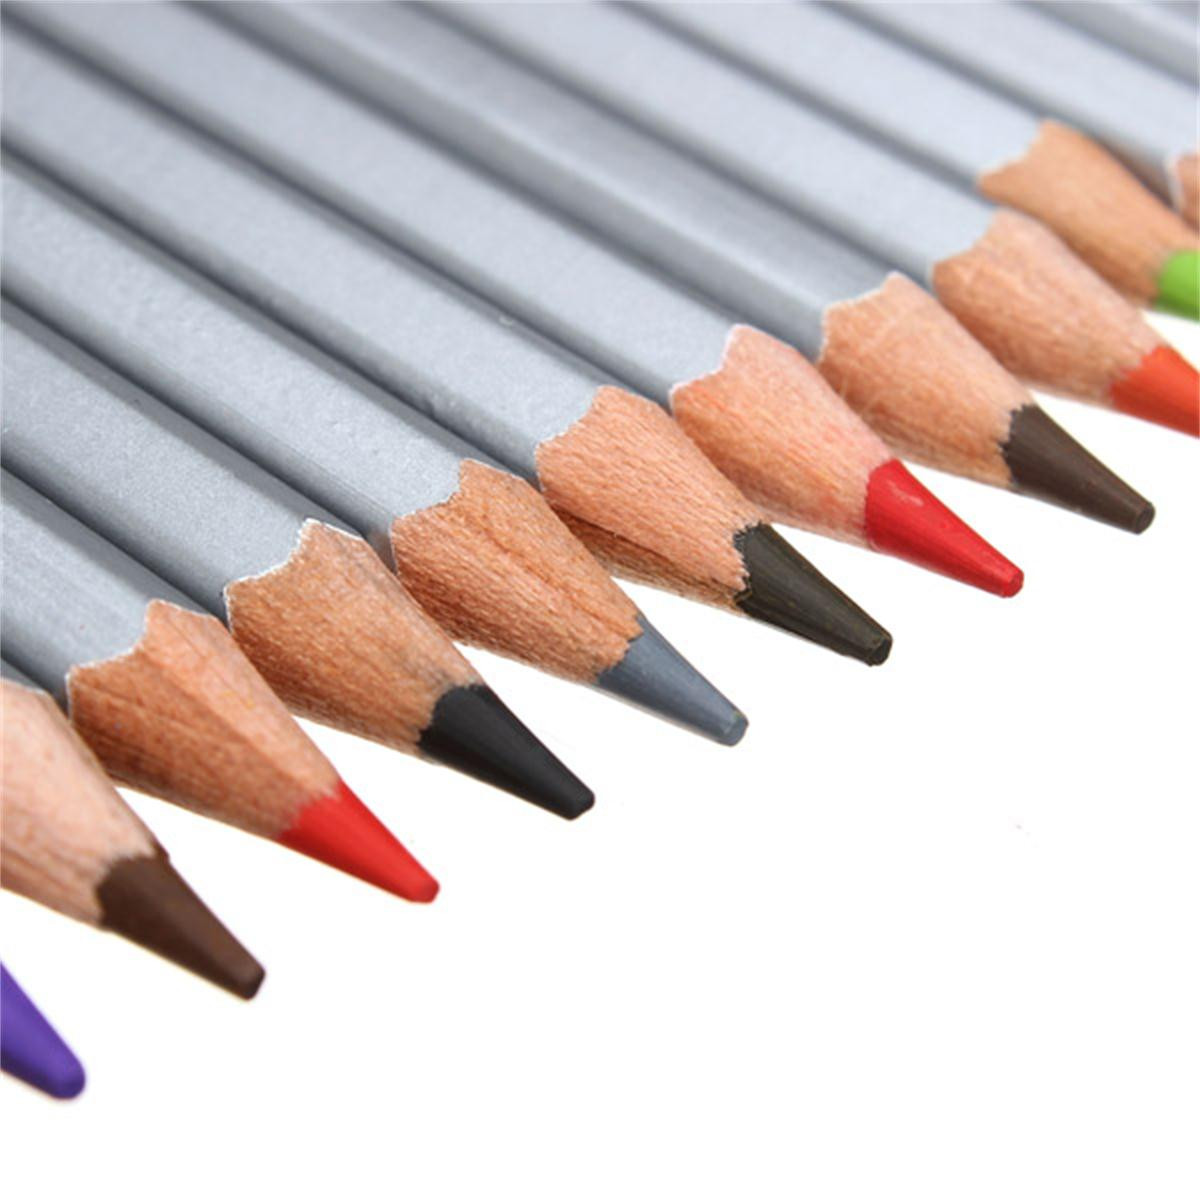 72-Colors-Art-Drawing-Pencil-Set-Oil-Non-toxic-Pencils-Painting-Sketching-Drawing-Stationery-School--973251-11